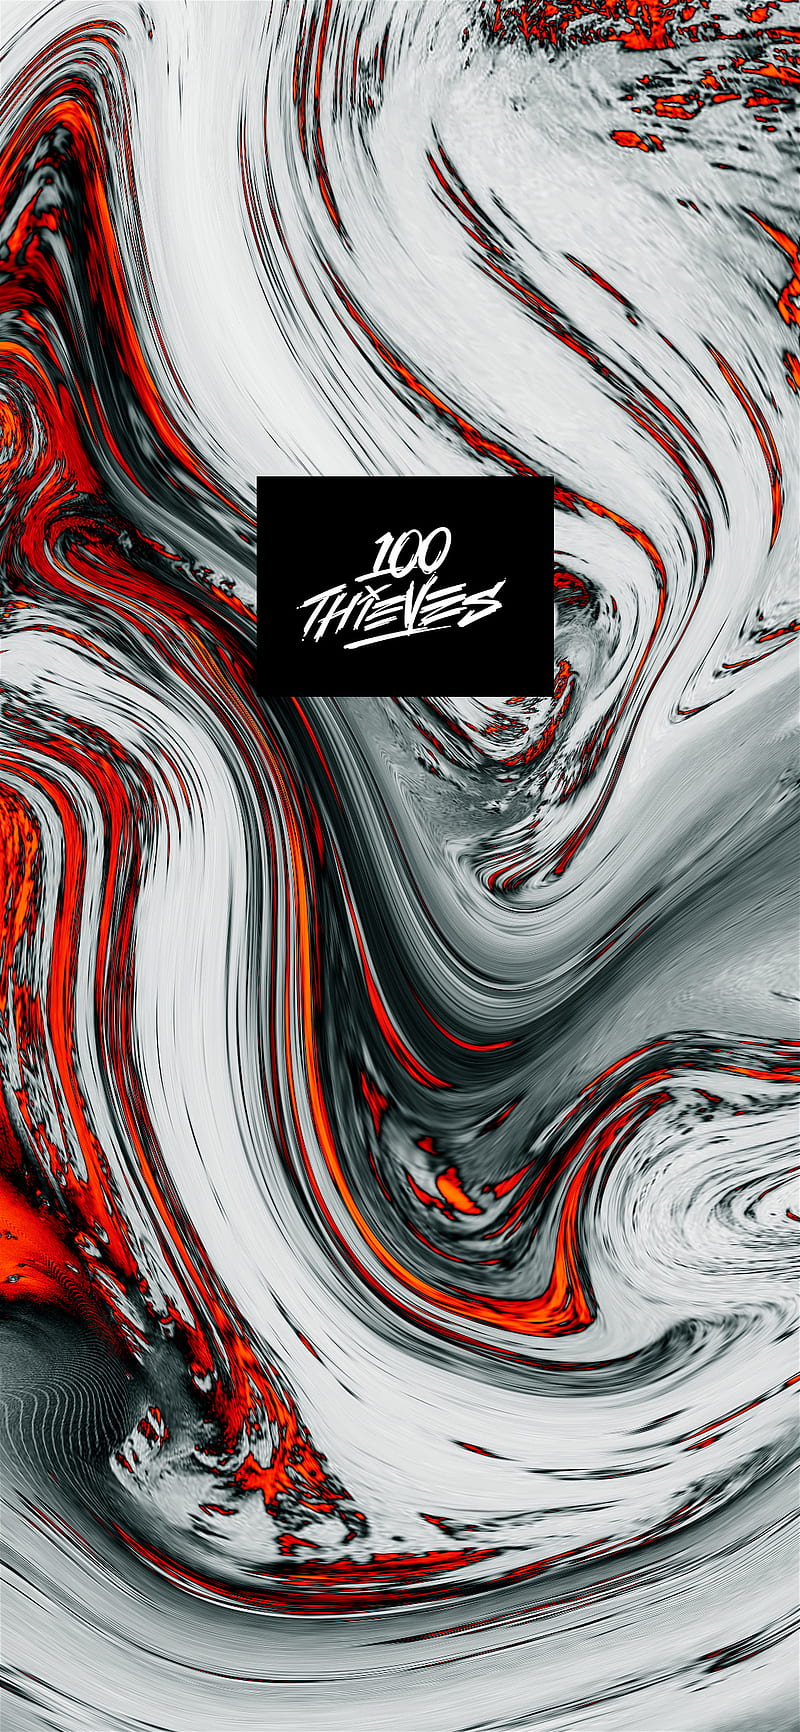 100 Thieves Joins Call of Duty League By Purchasing Los Angeles Slot   Sporticocom